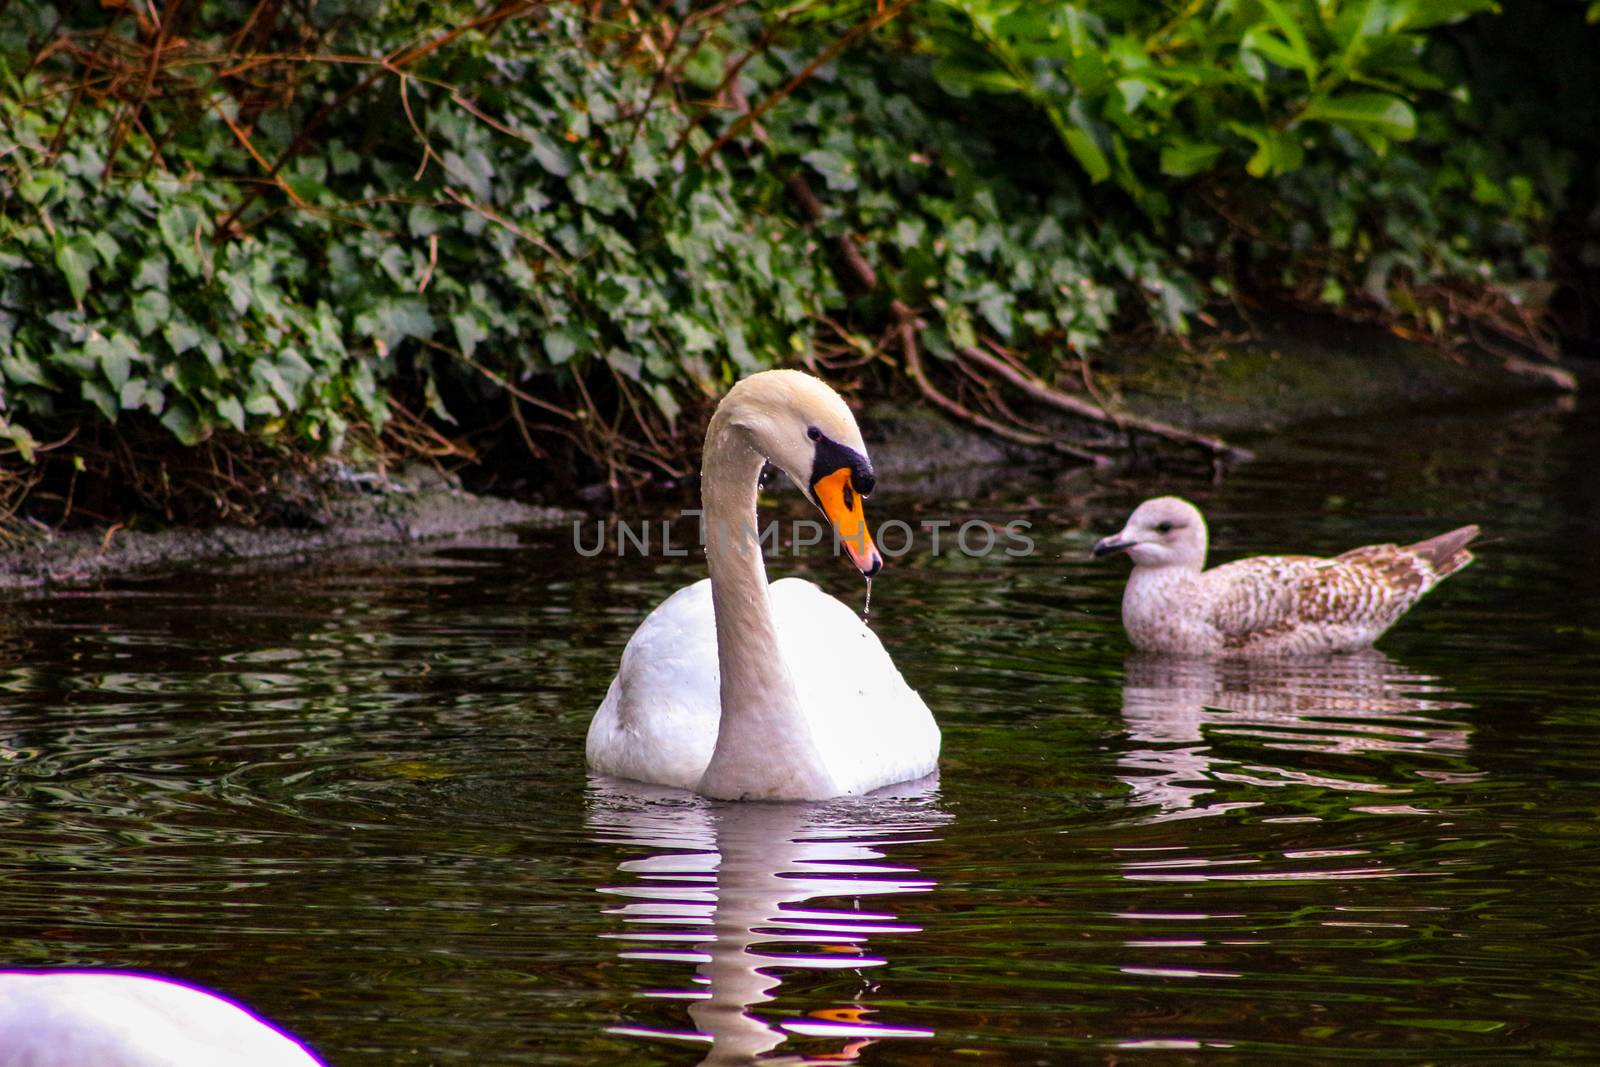 Mute swan cygnets, Cygnus olor, watched over by pen and cob, swimming in Grand Canal, Dublin, Ireland. Four young fluffy baby swans with soft down in water beside mother and father.